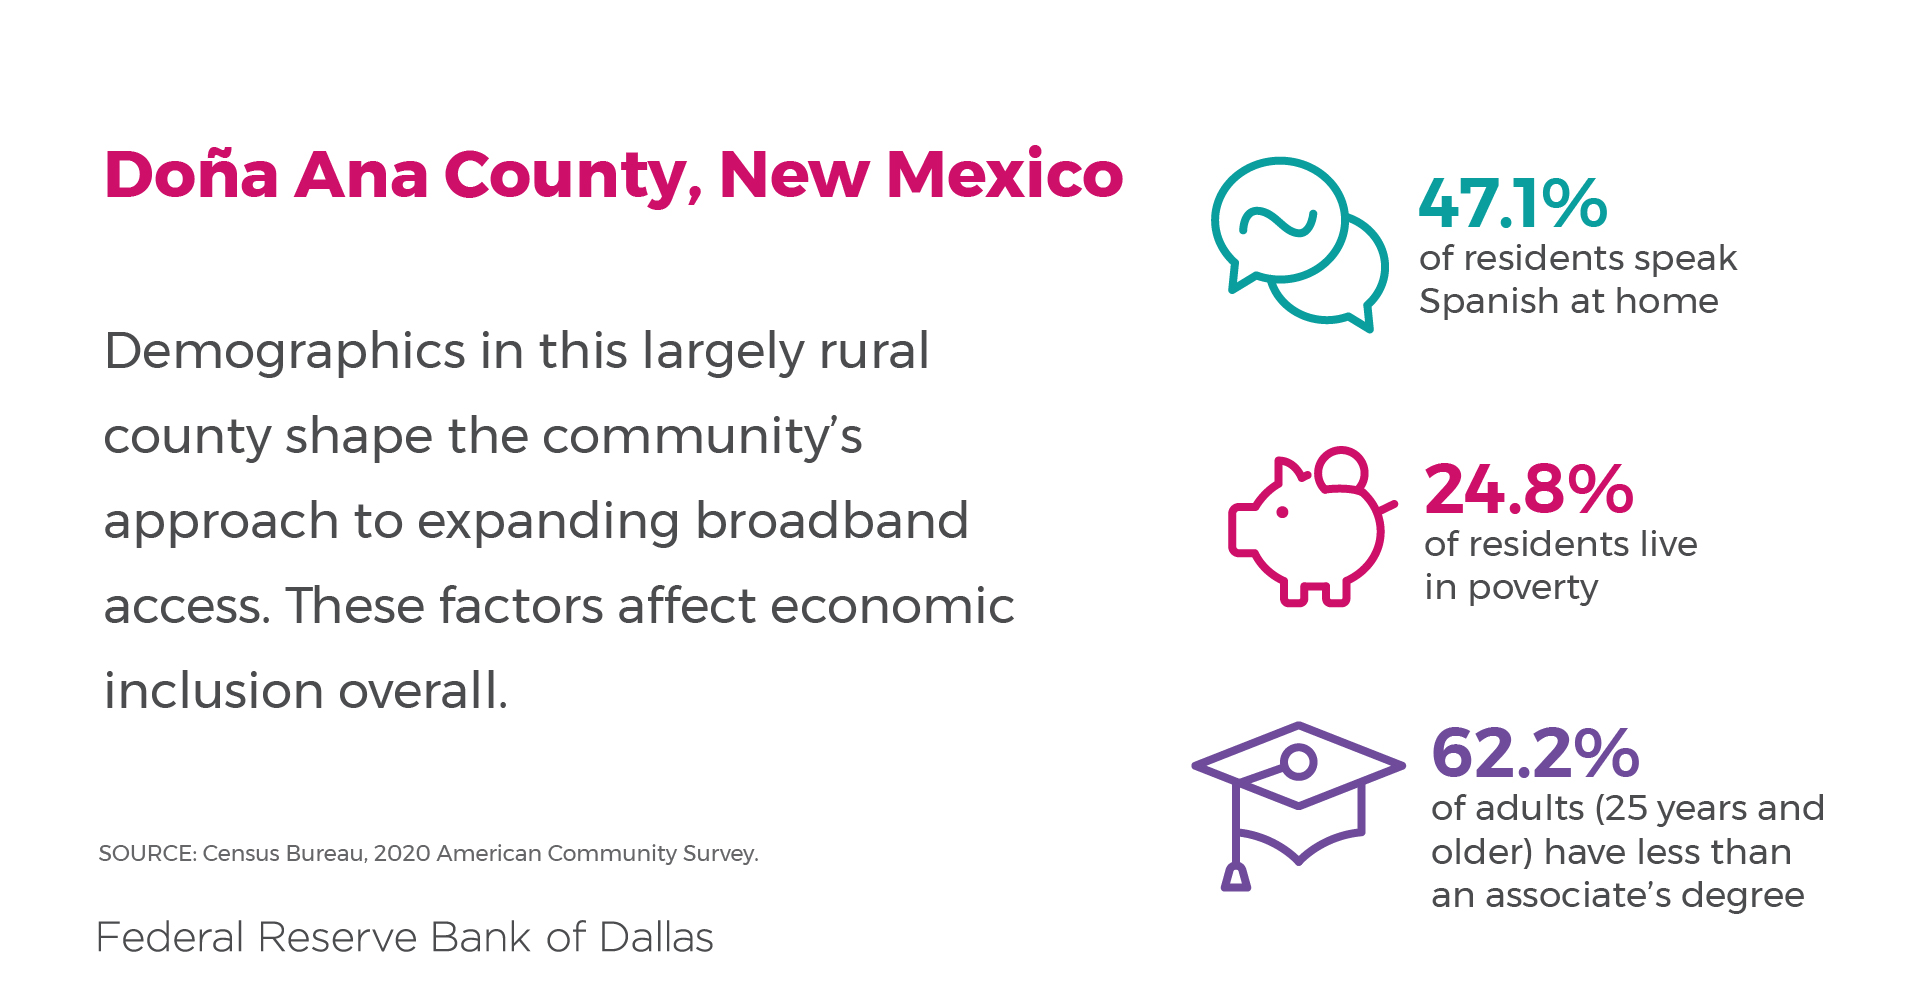 Demographics shape approach to expanding broadband access in Doña Ana County, New Mexico